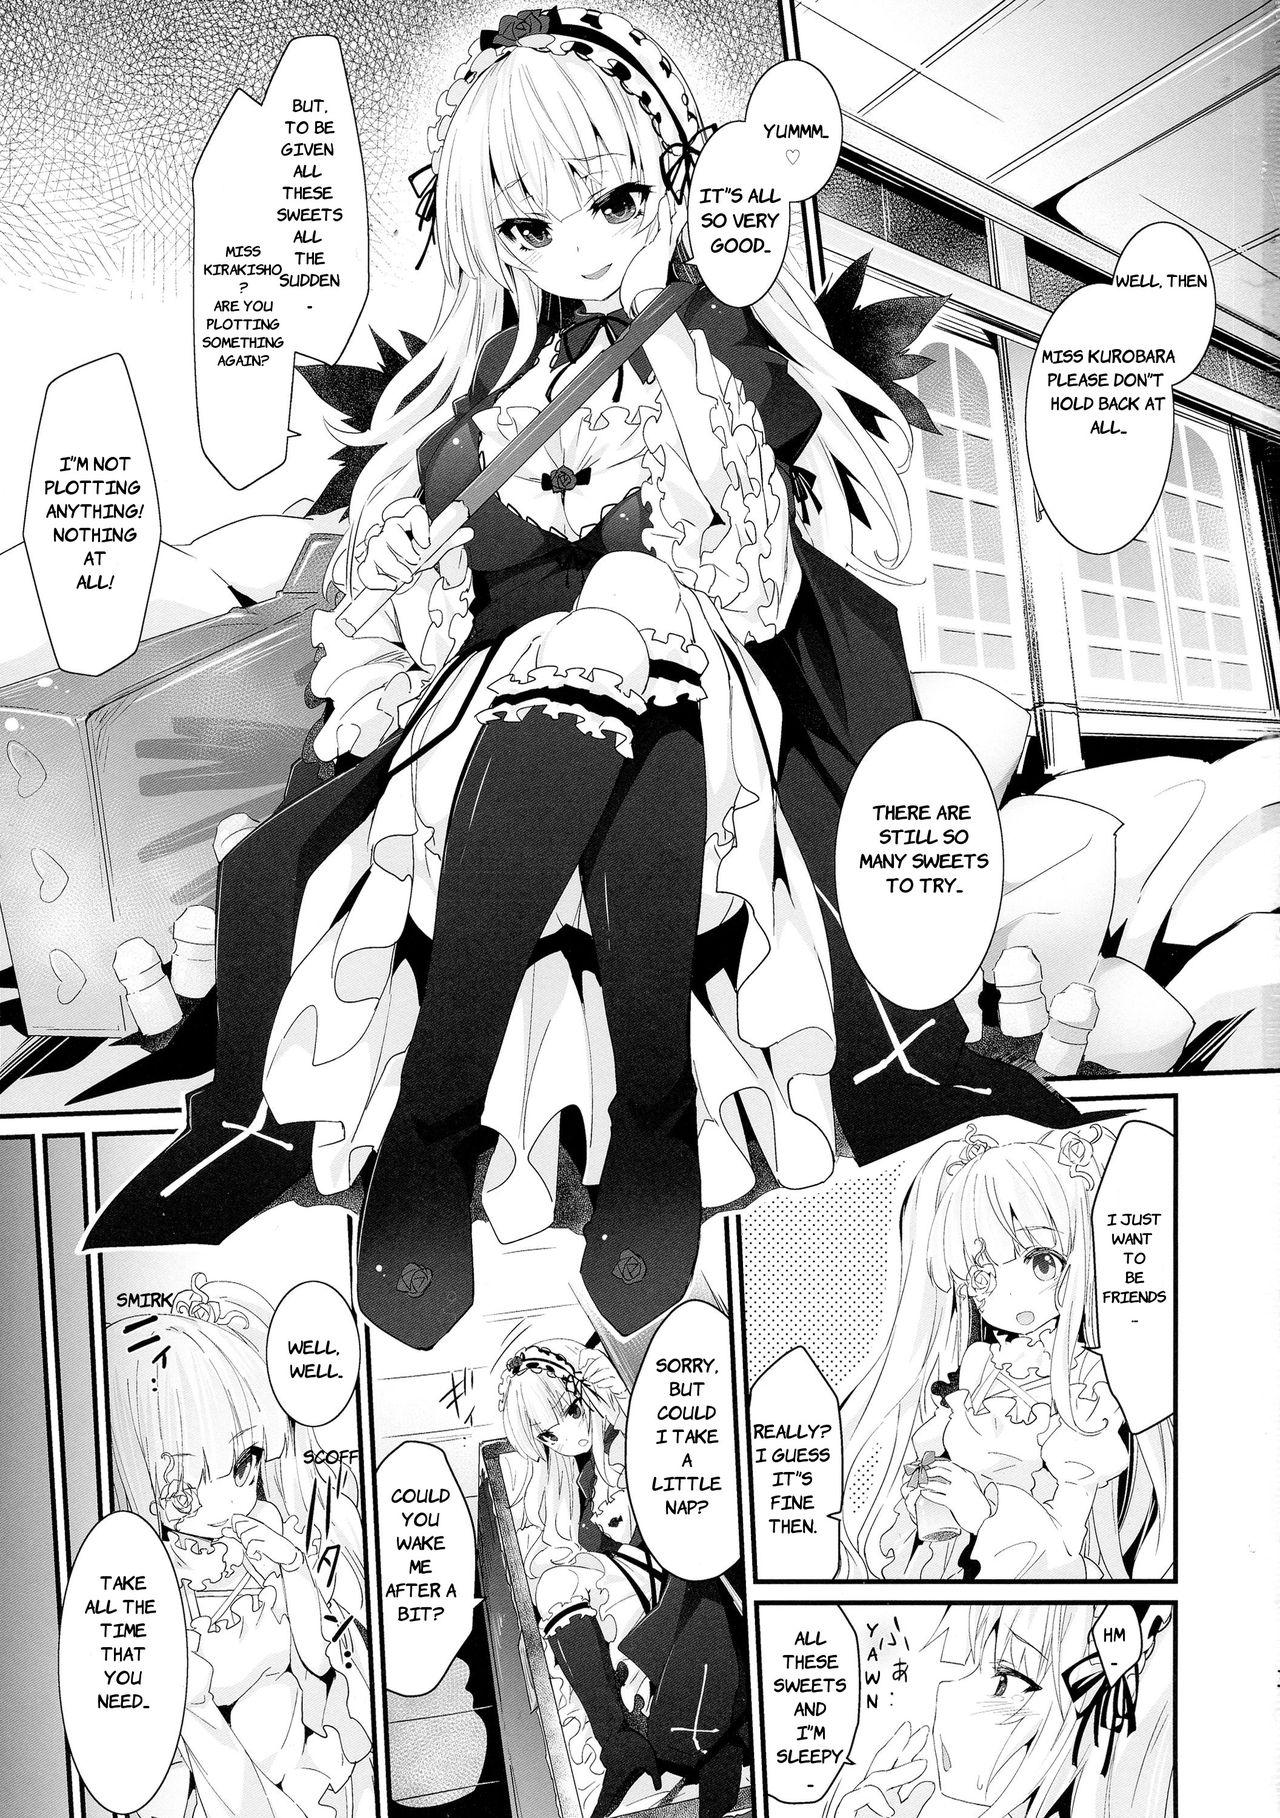 Tiny Meat Rose - Rozen maiden Sapphicerotica - Page 3